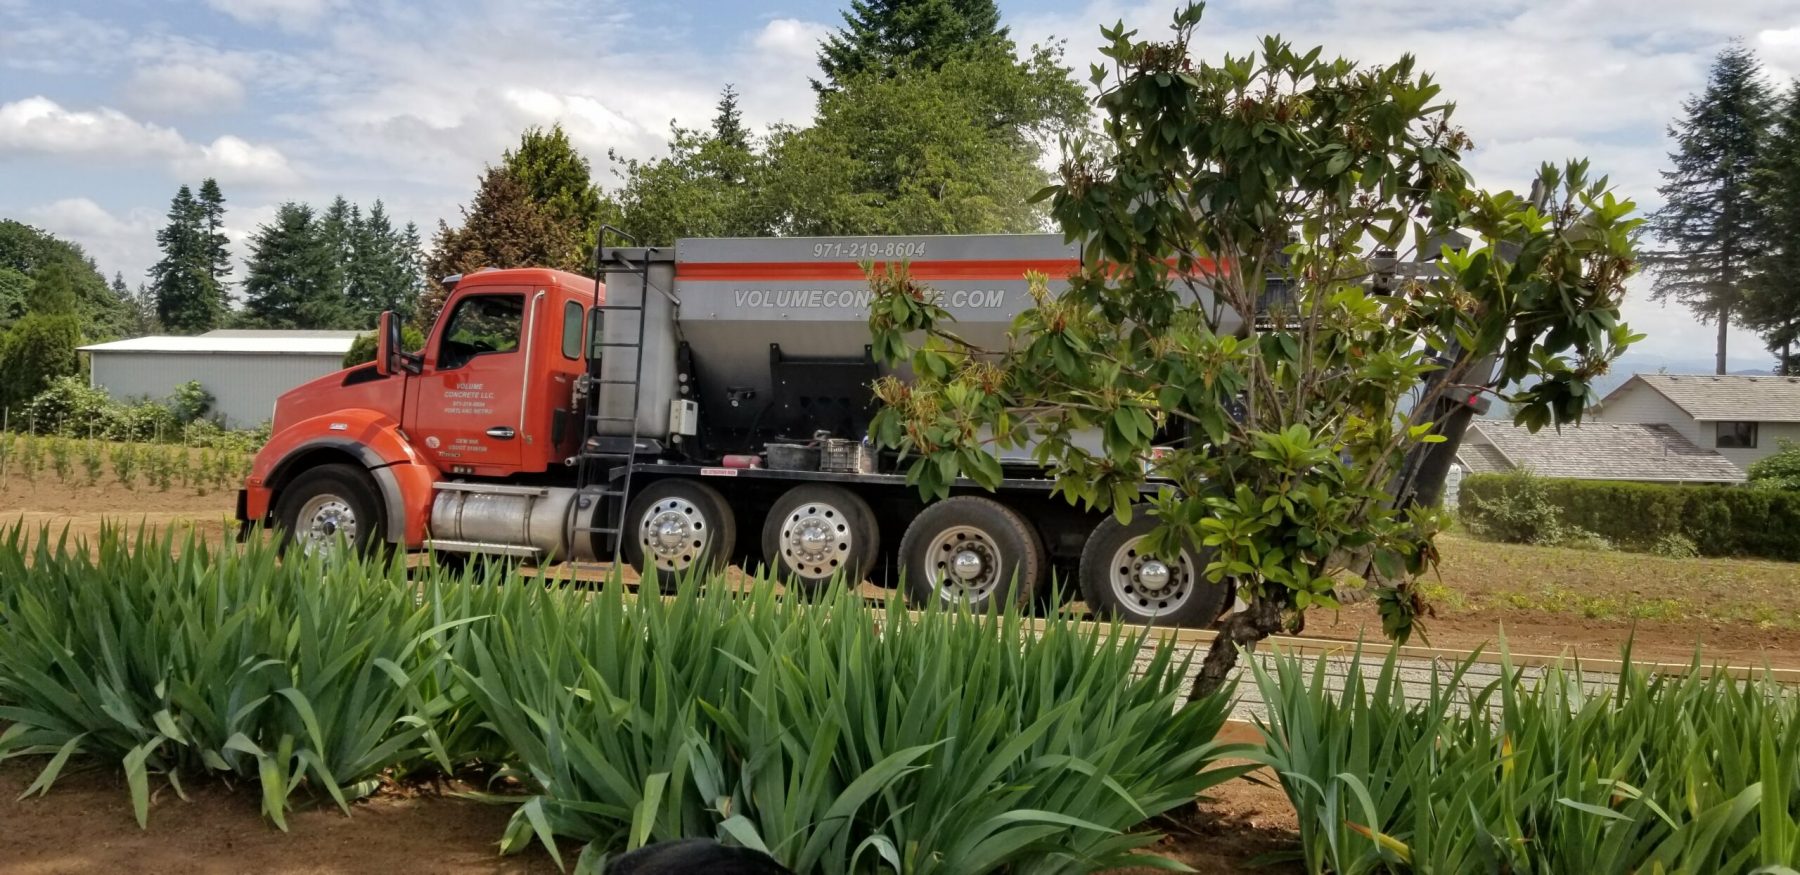 Delivery of the concrete